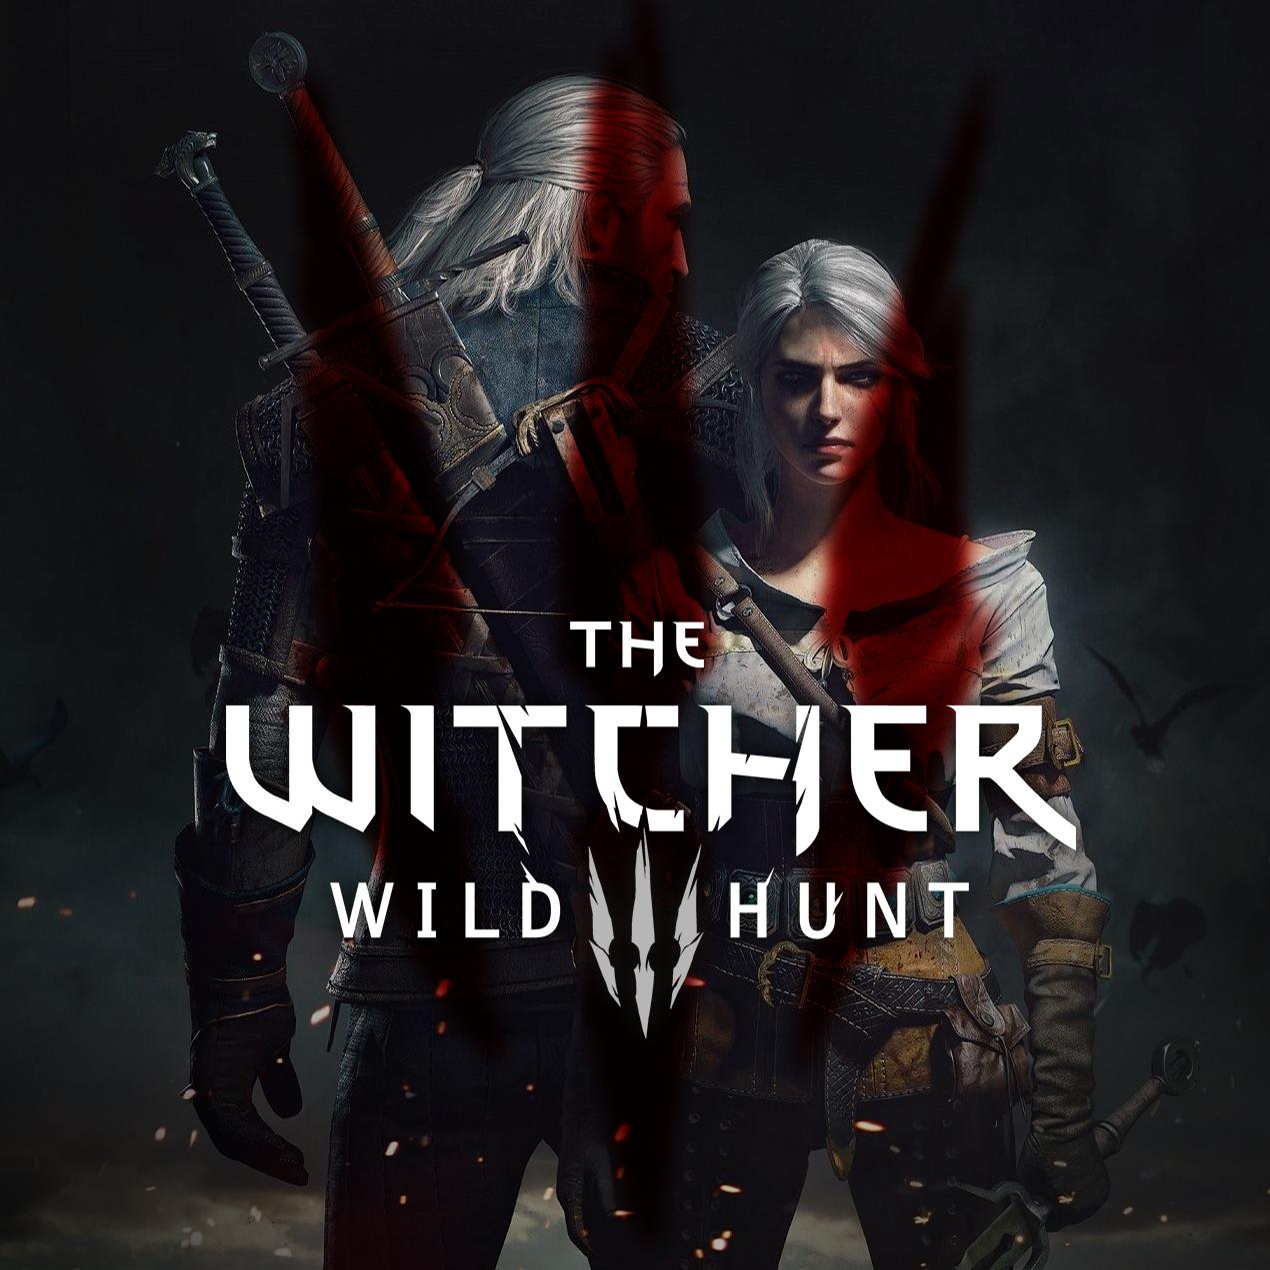 The witcher 3 witcher script merger фото 86